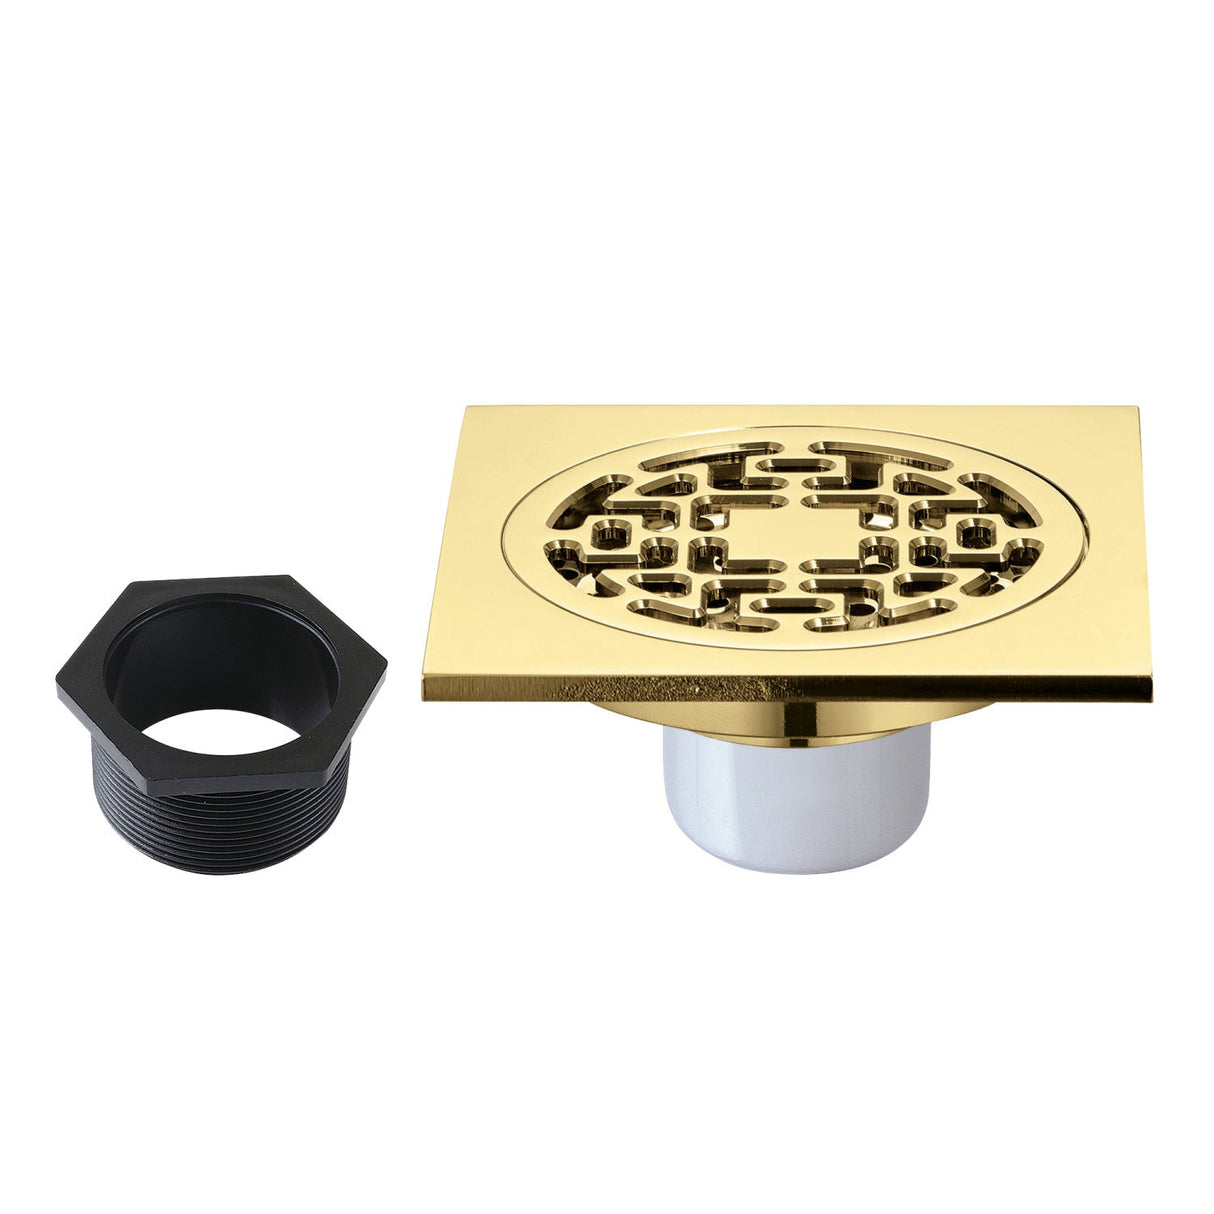 Watercourse BSF4272PB 4-Inch Square Brass Shower Drain, Polished Brass